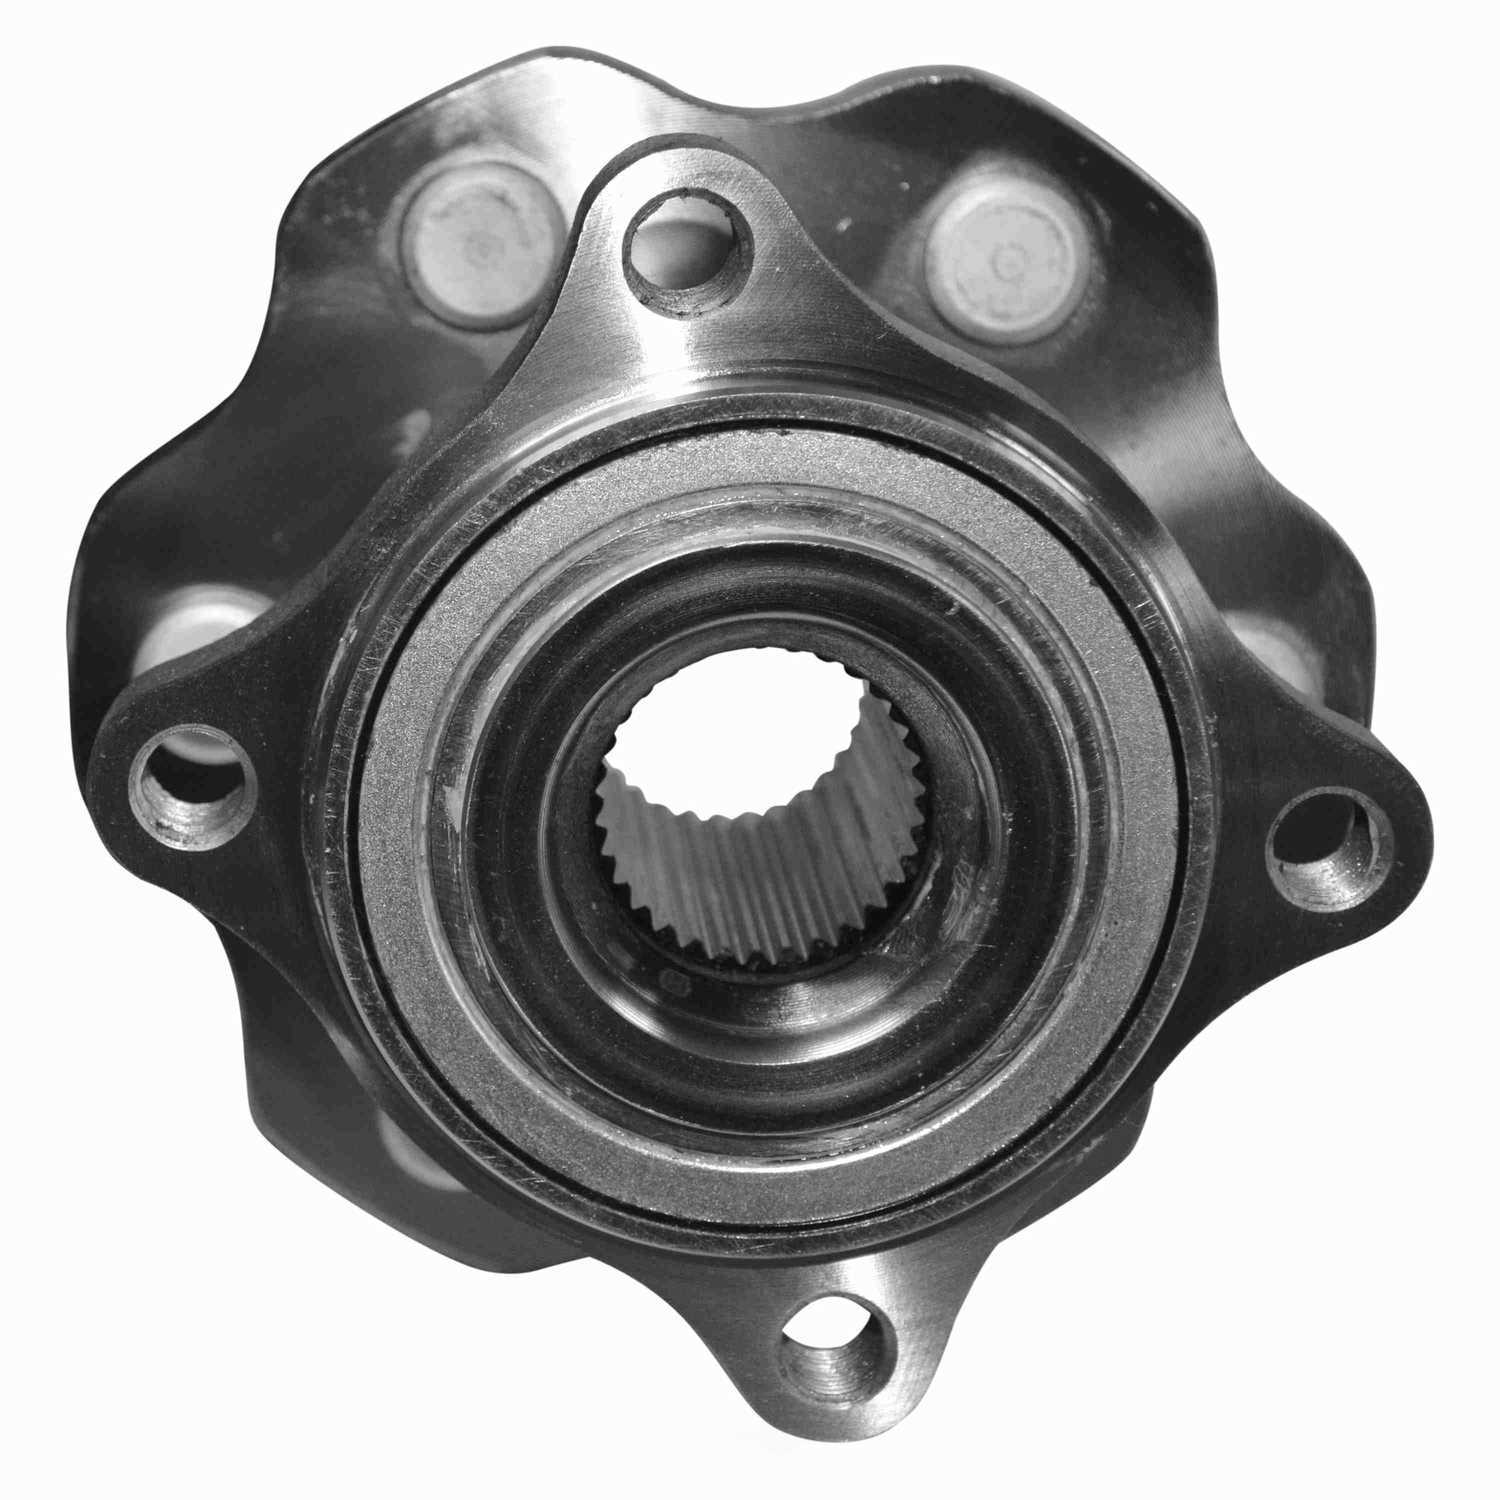 GSP NORTH AMERICA INC. - GSP Axle Bearing & Hub Assembly - AD8 532003